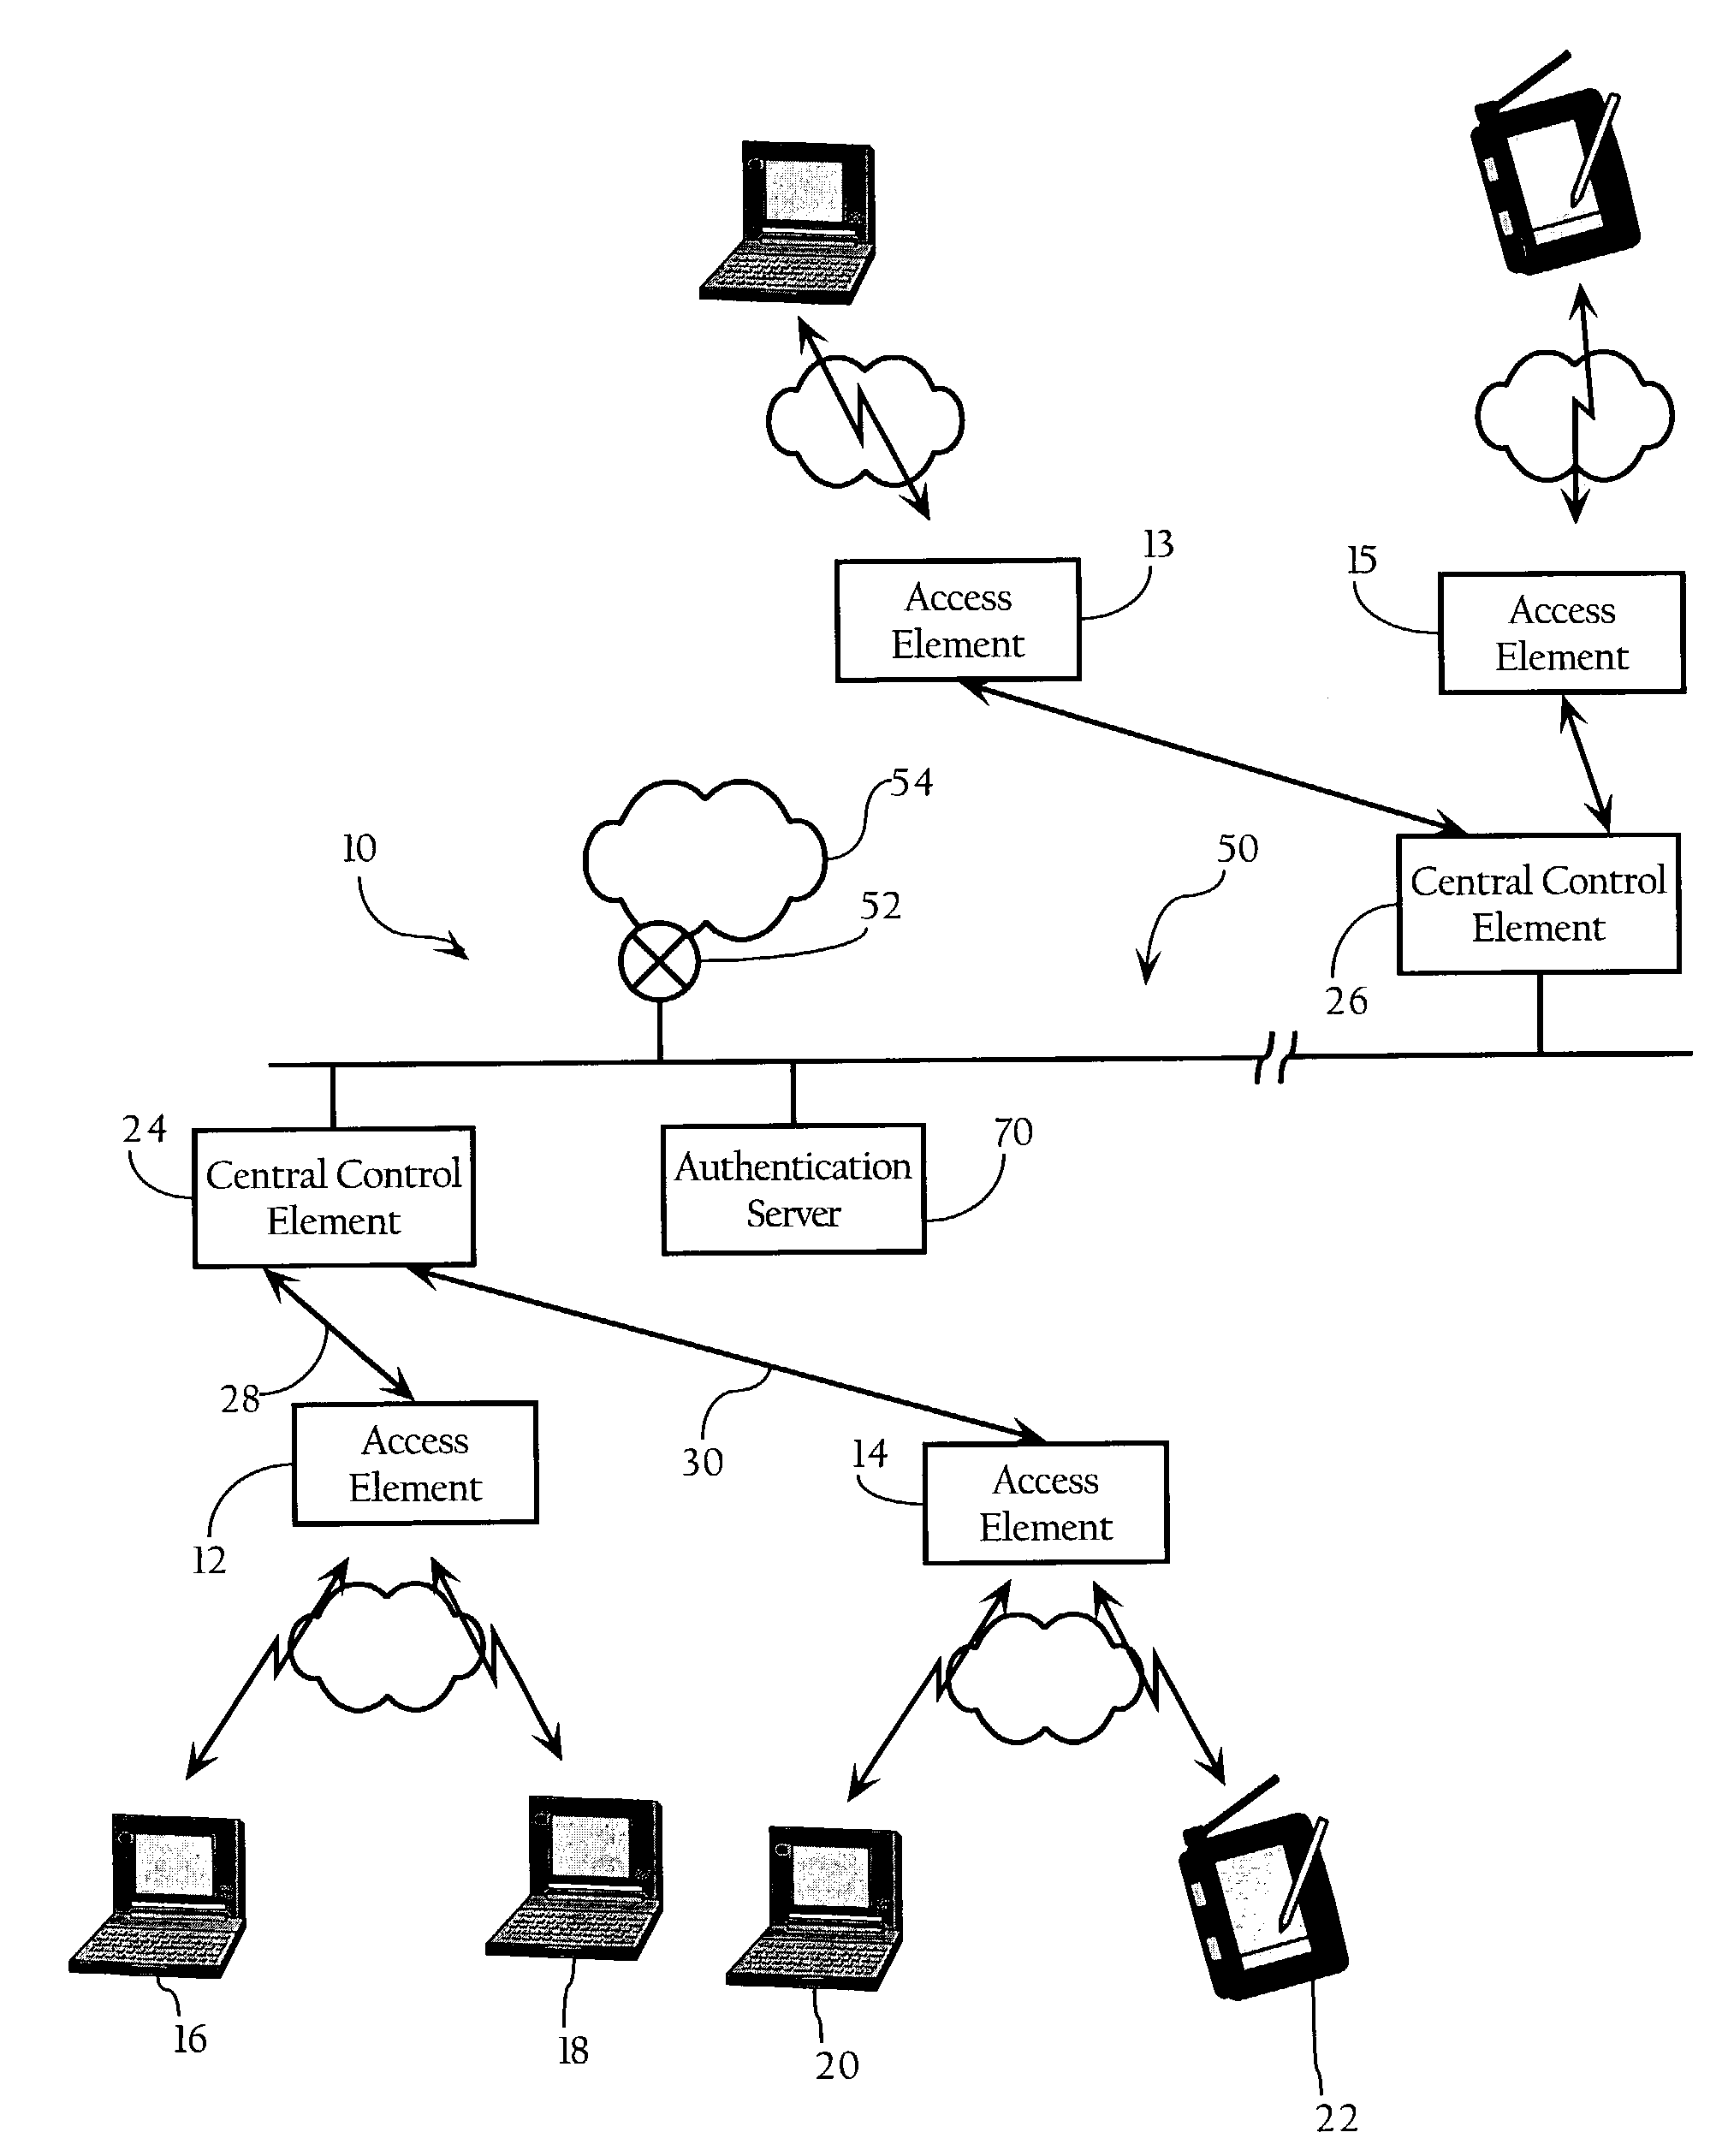 Distributed wireless network security system